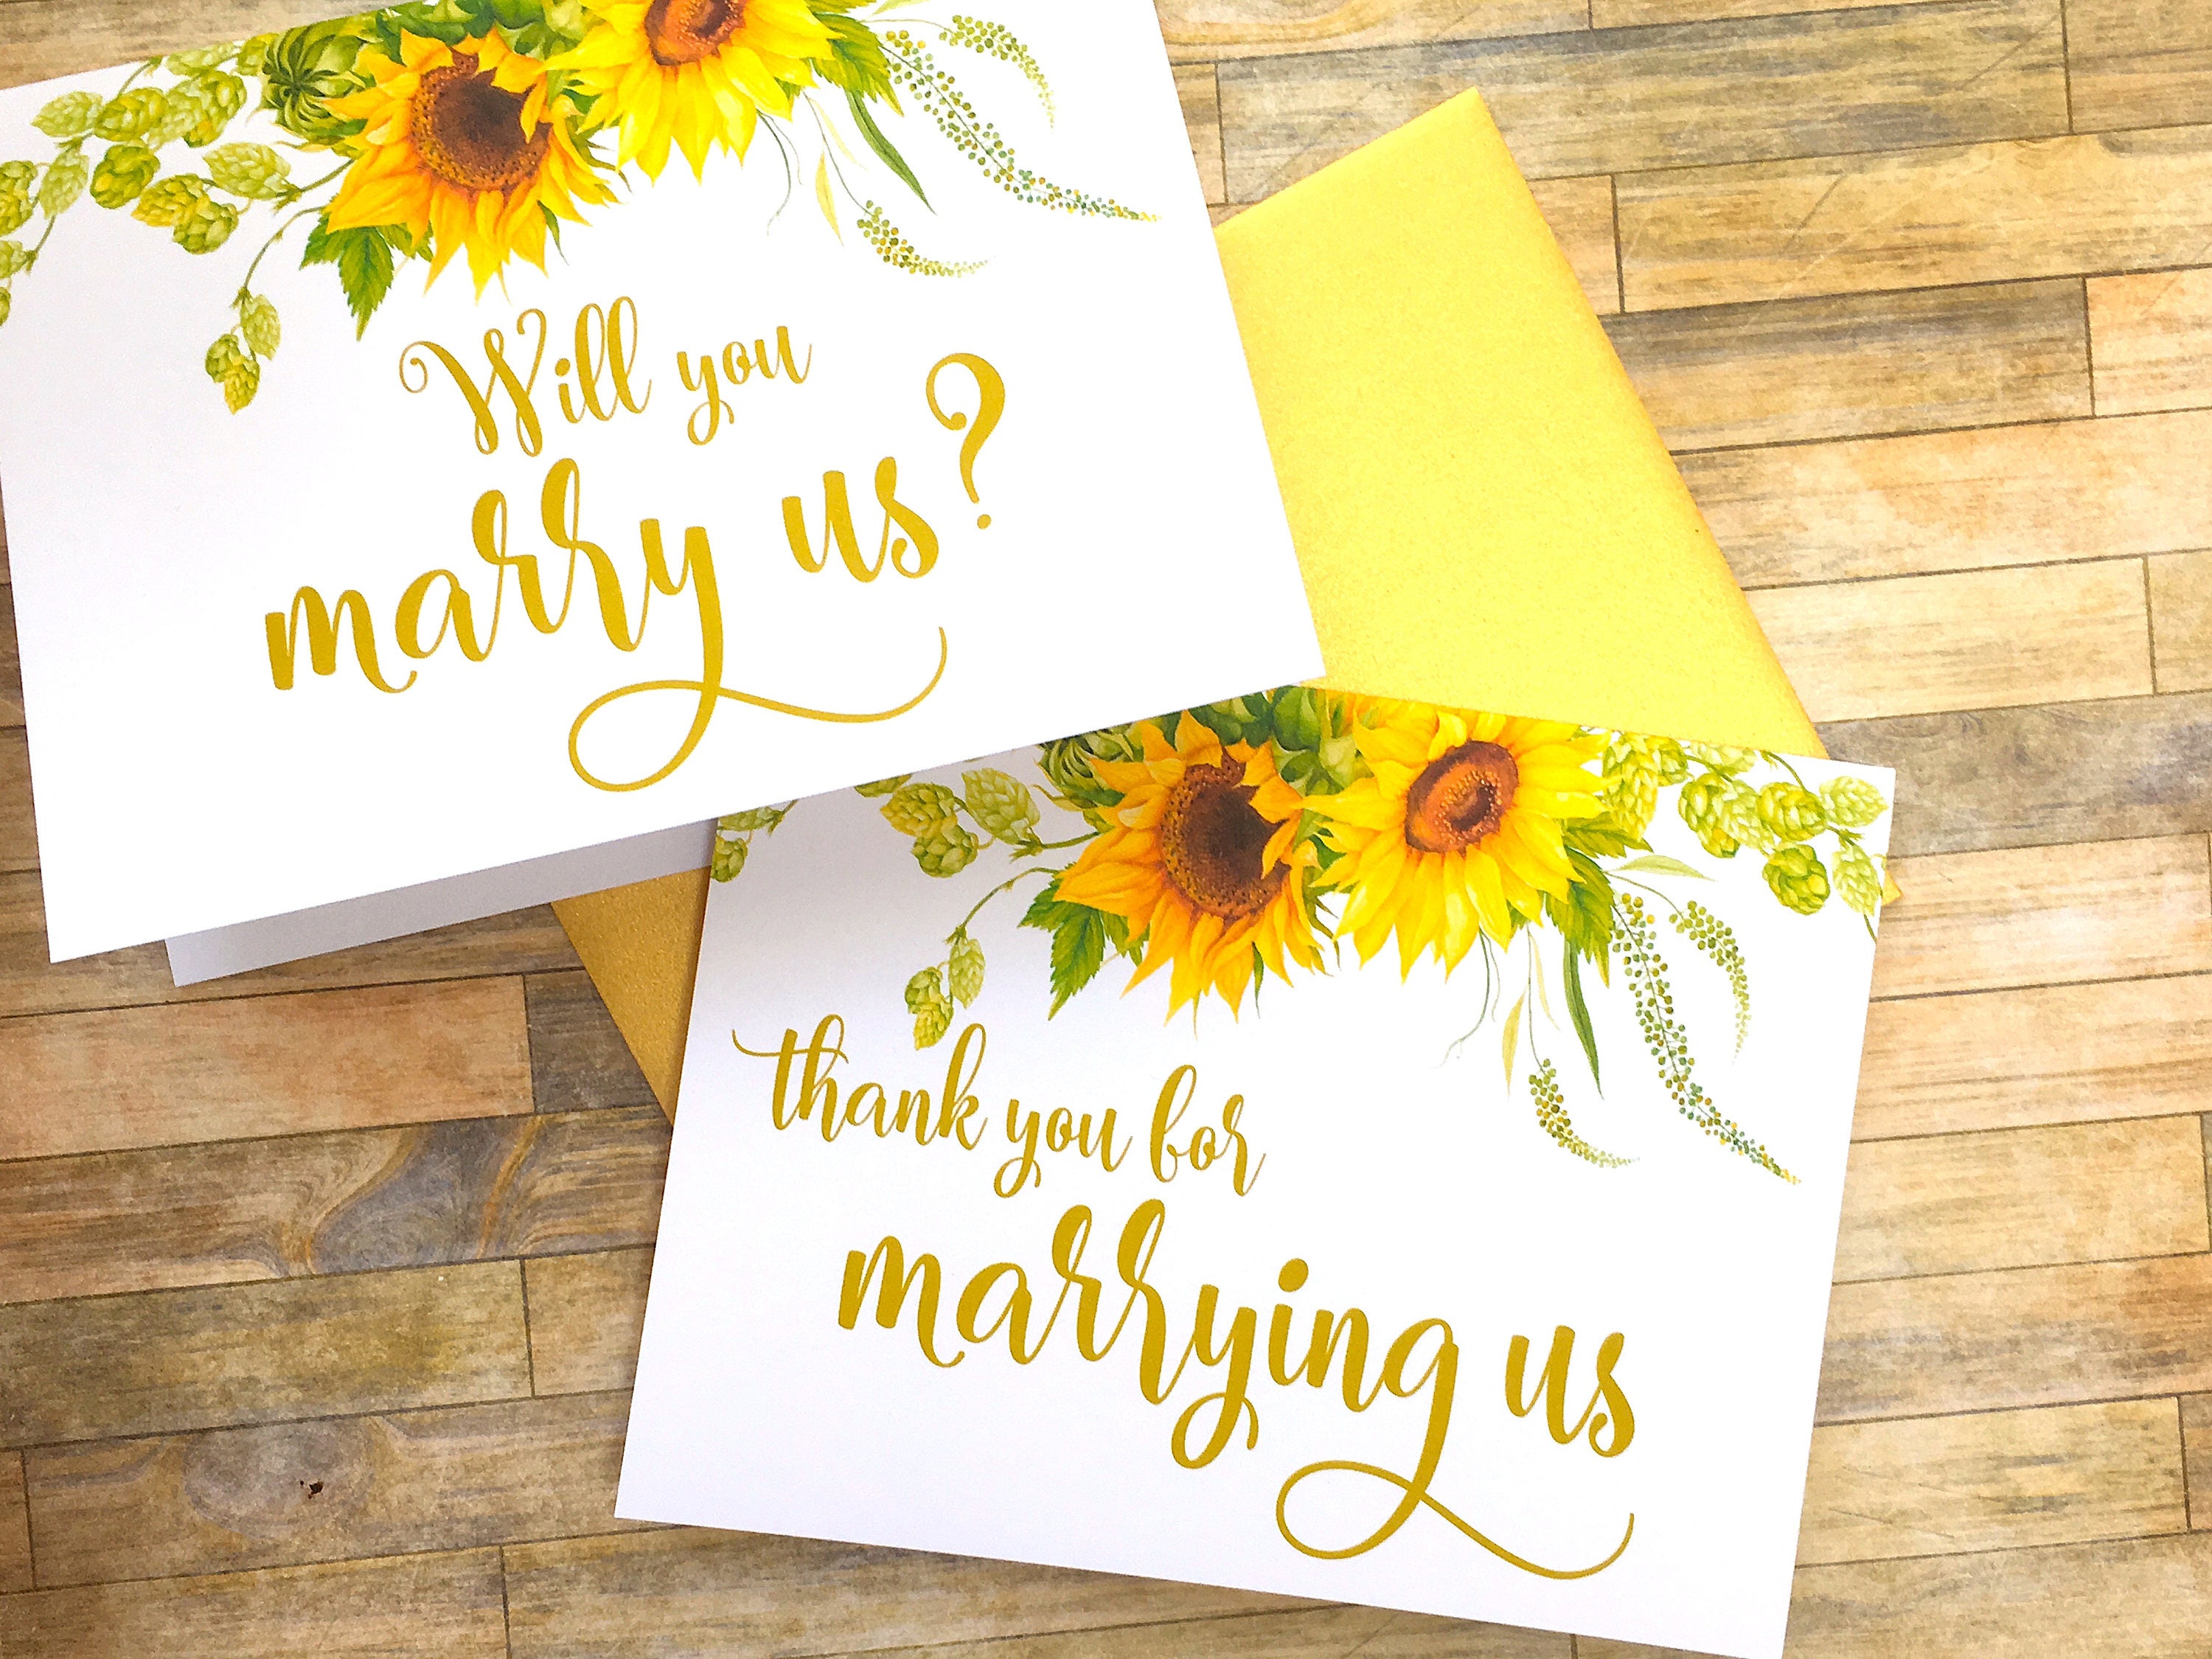 Will You Marry Us - Card To Ask Officiant Wedding Gift Help Tie The Knot Sunbeams